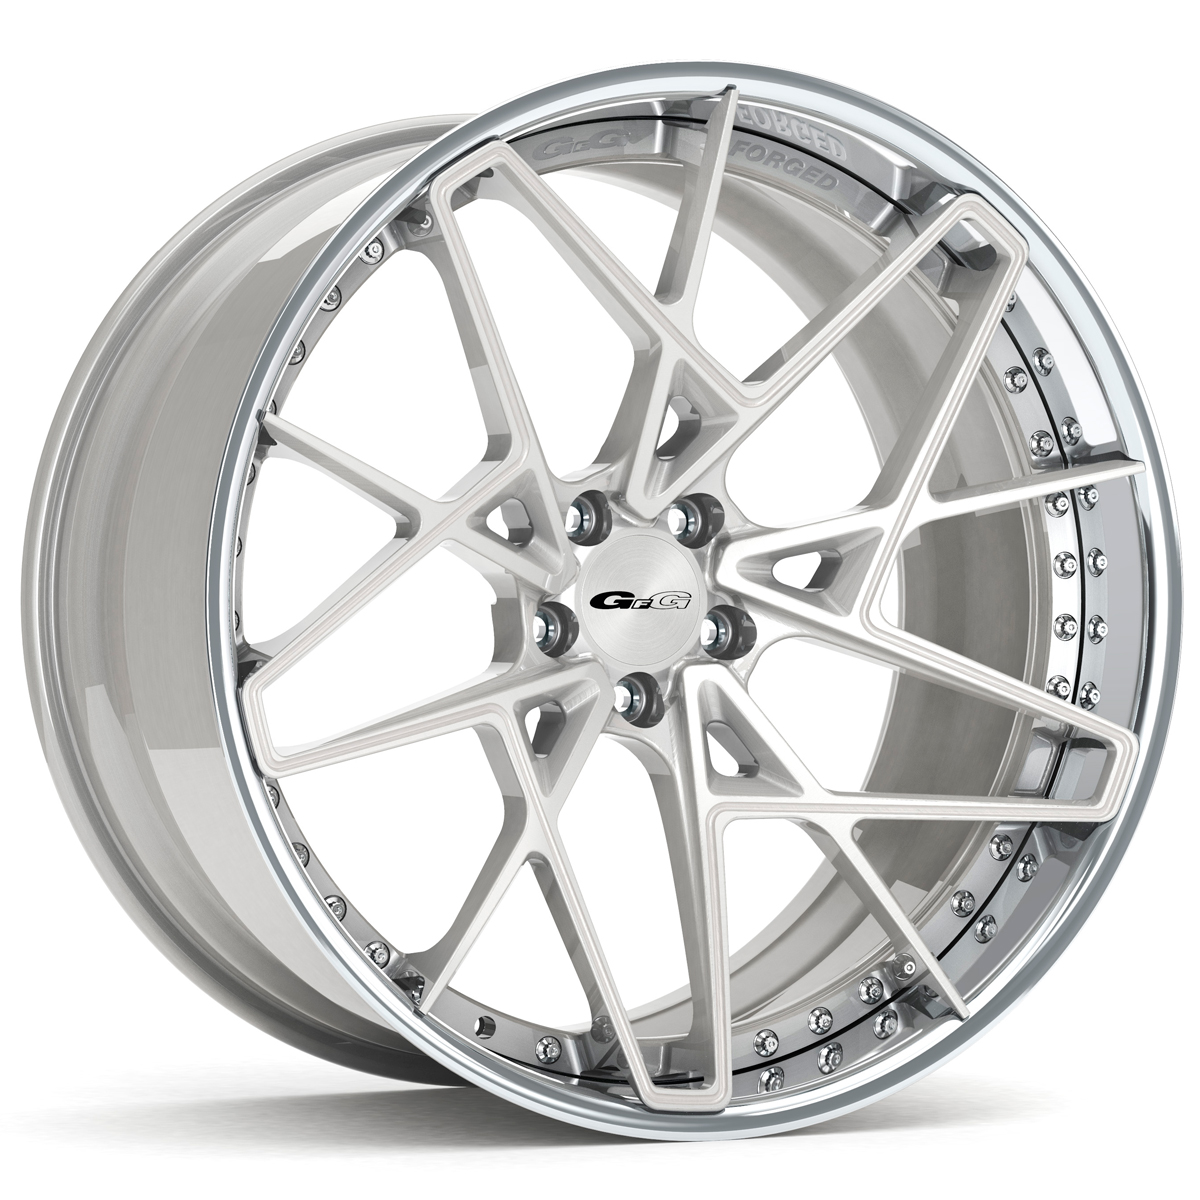 Giovanna Luxury Wheels Giovanna Luxury Concave Wheels For Cars Trucks And Suv S